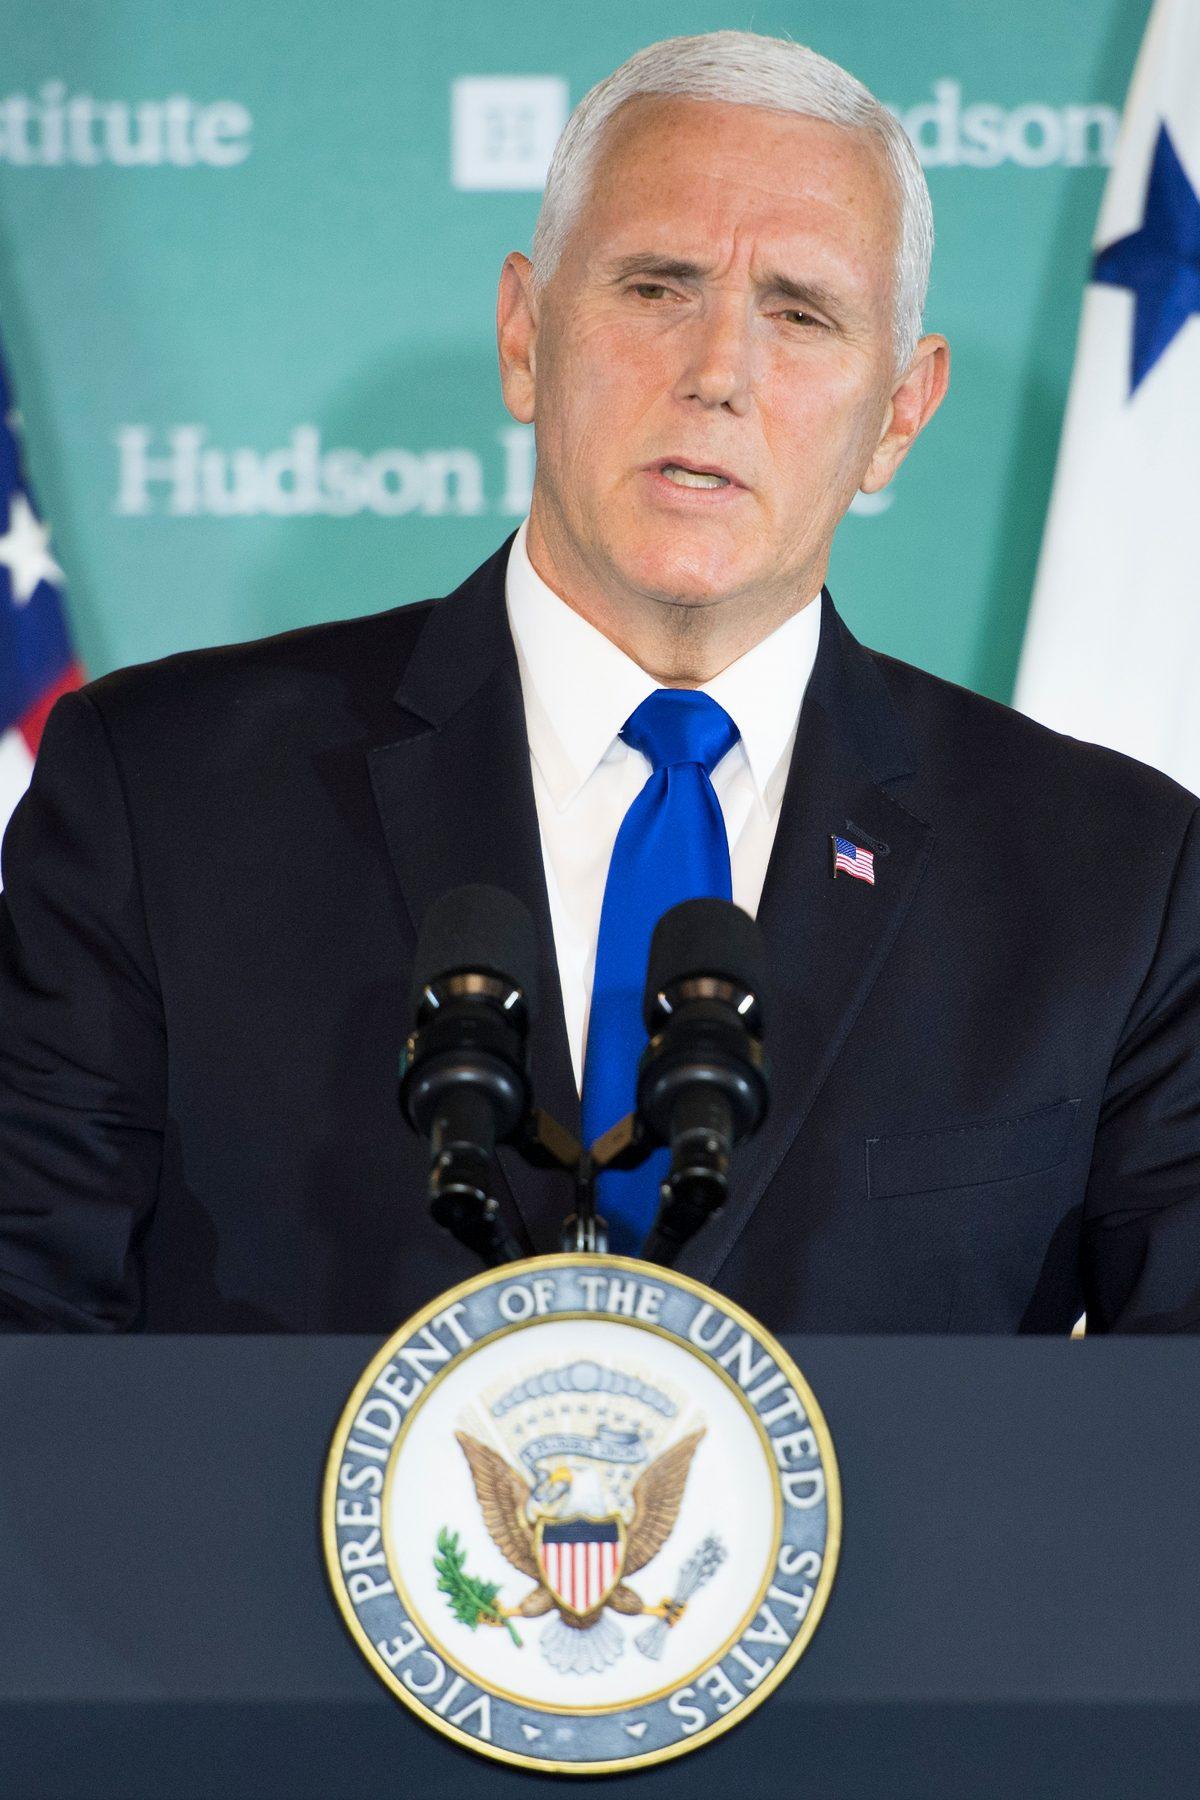 Vice President Mike Pence said in a speech at the Hudson Institute in October that previous administrations have ignored China’s misbehavior, “but those days are over.” (JIM WATSON/AFP/Getty Images)